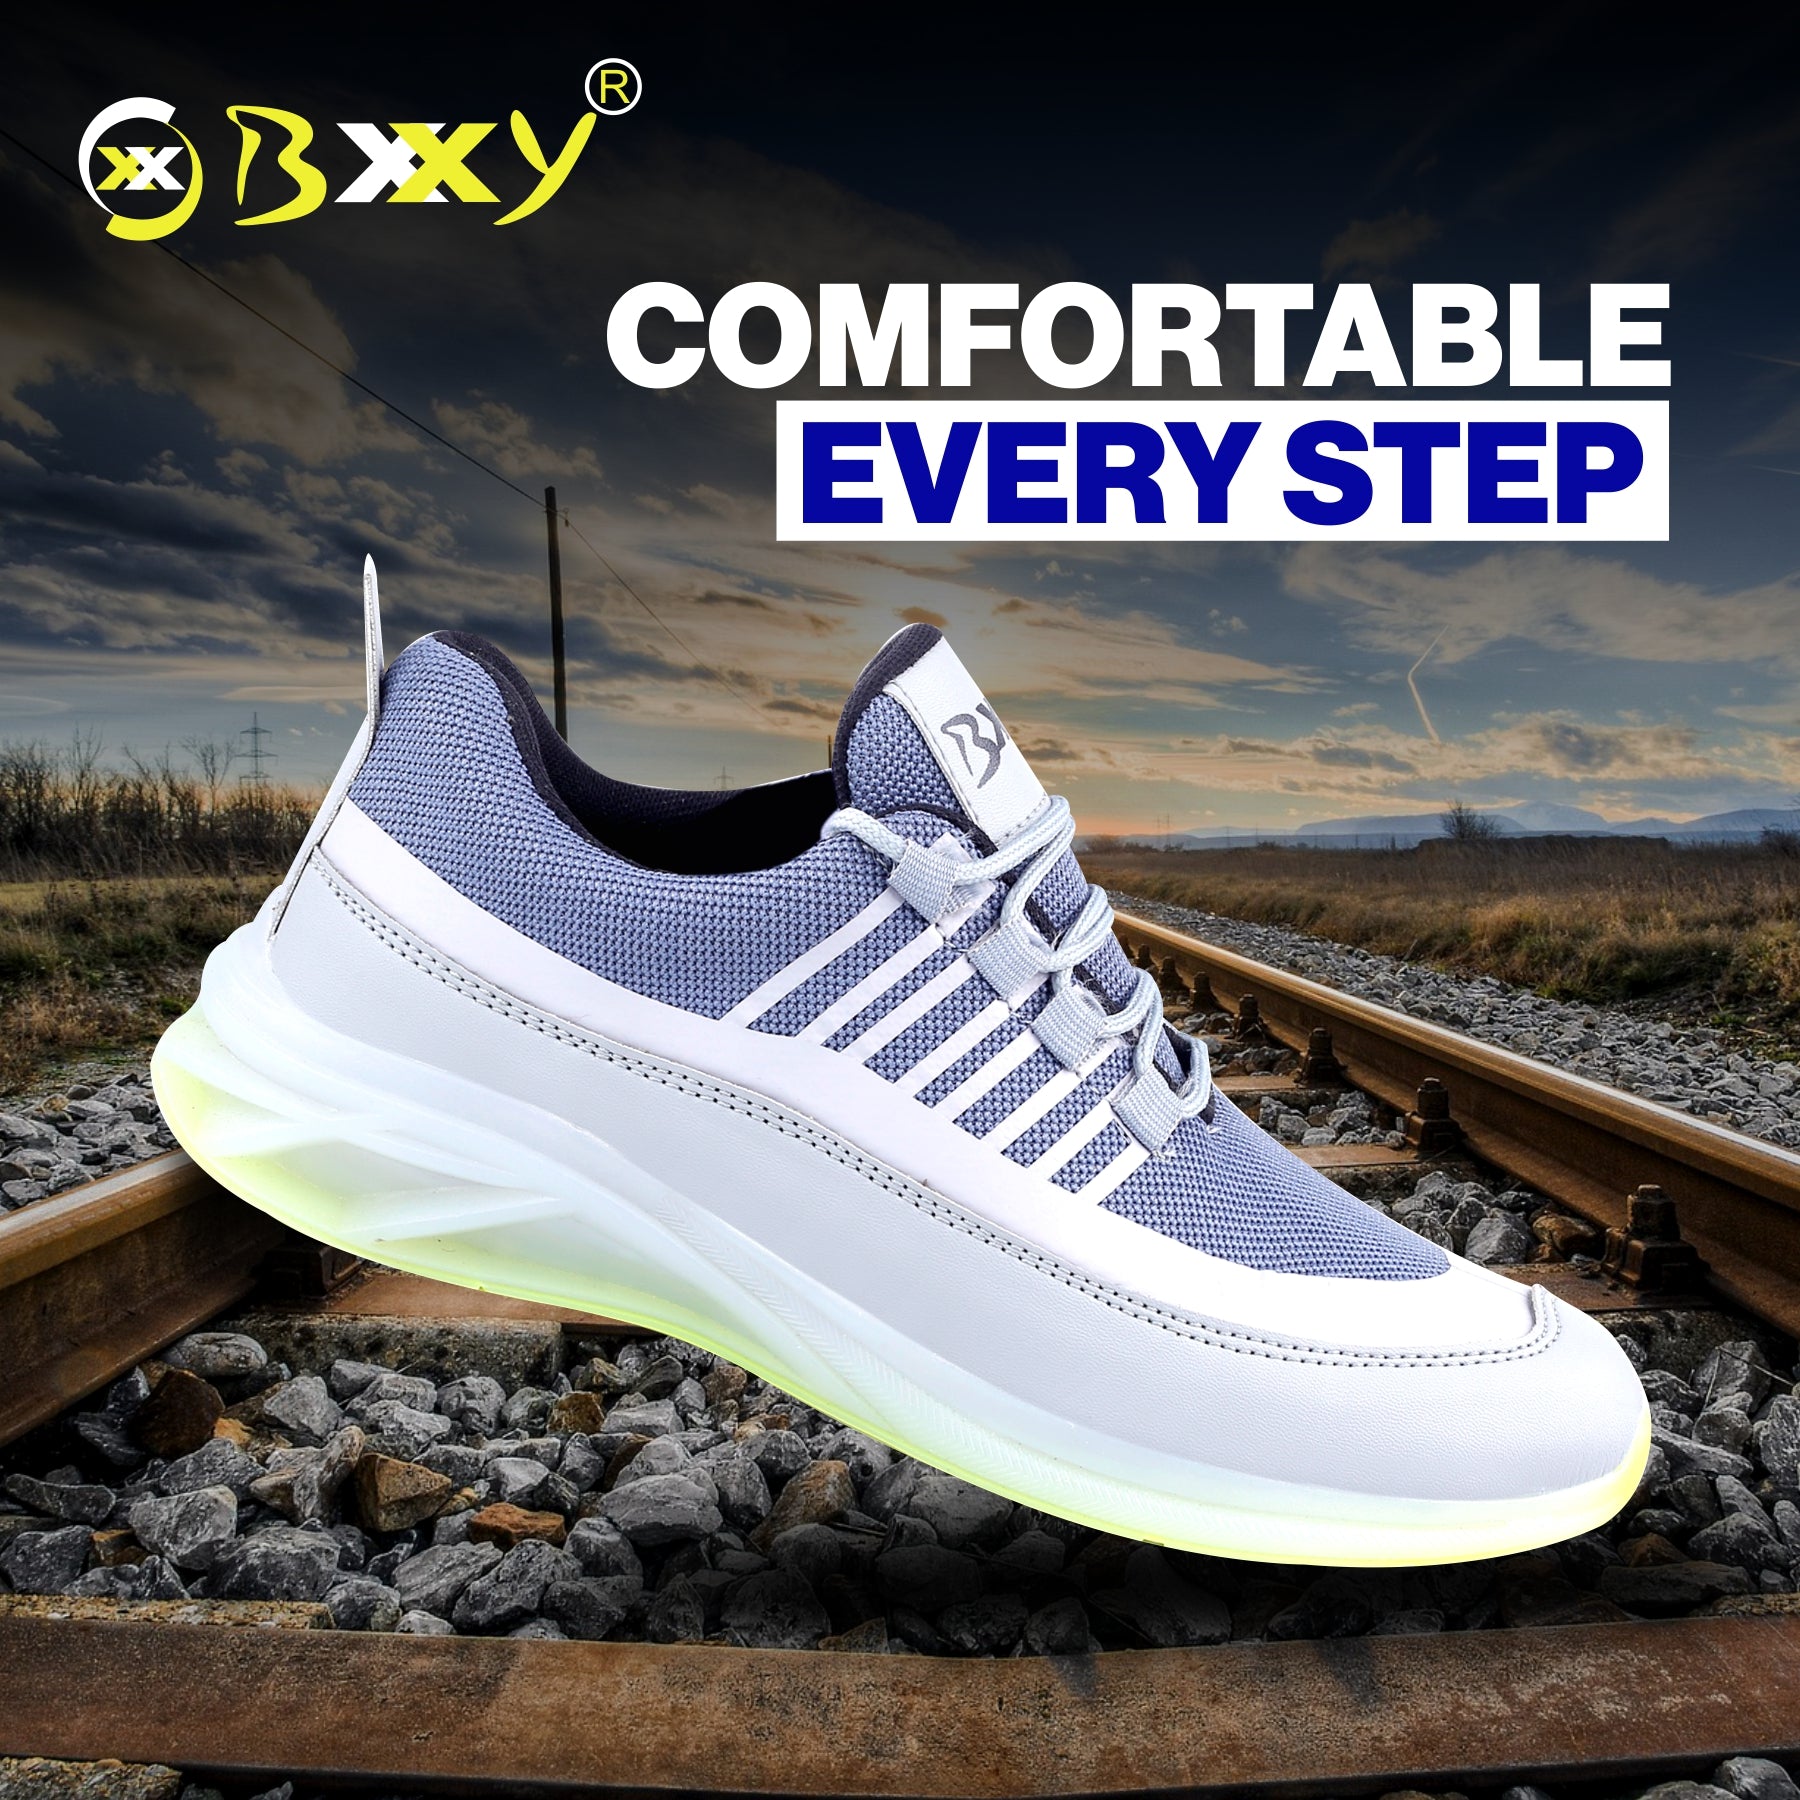 Bxxy's High-end Fashion Trendiest Casual Lace-up Shoes for Men